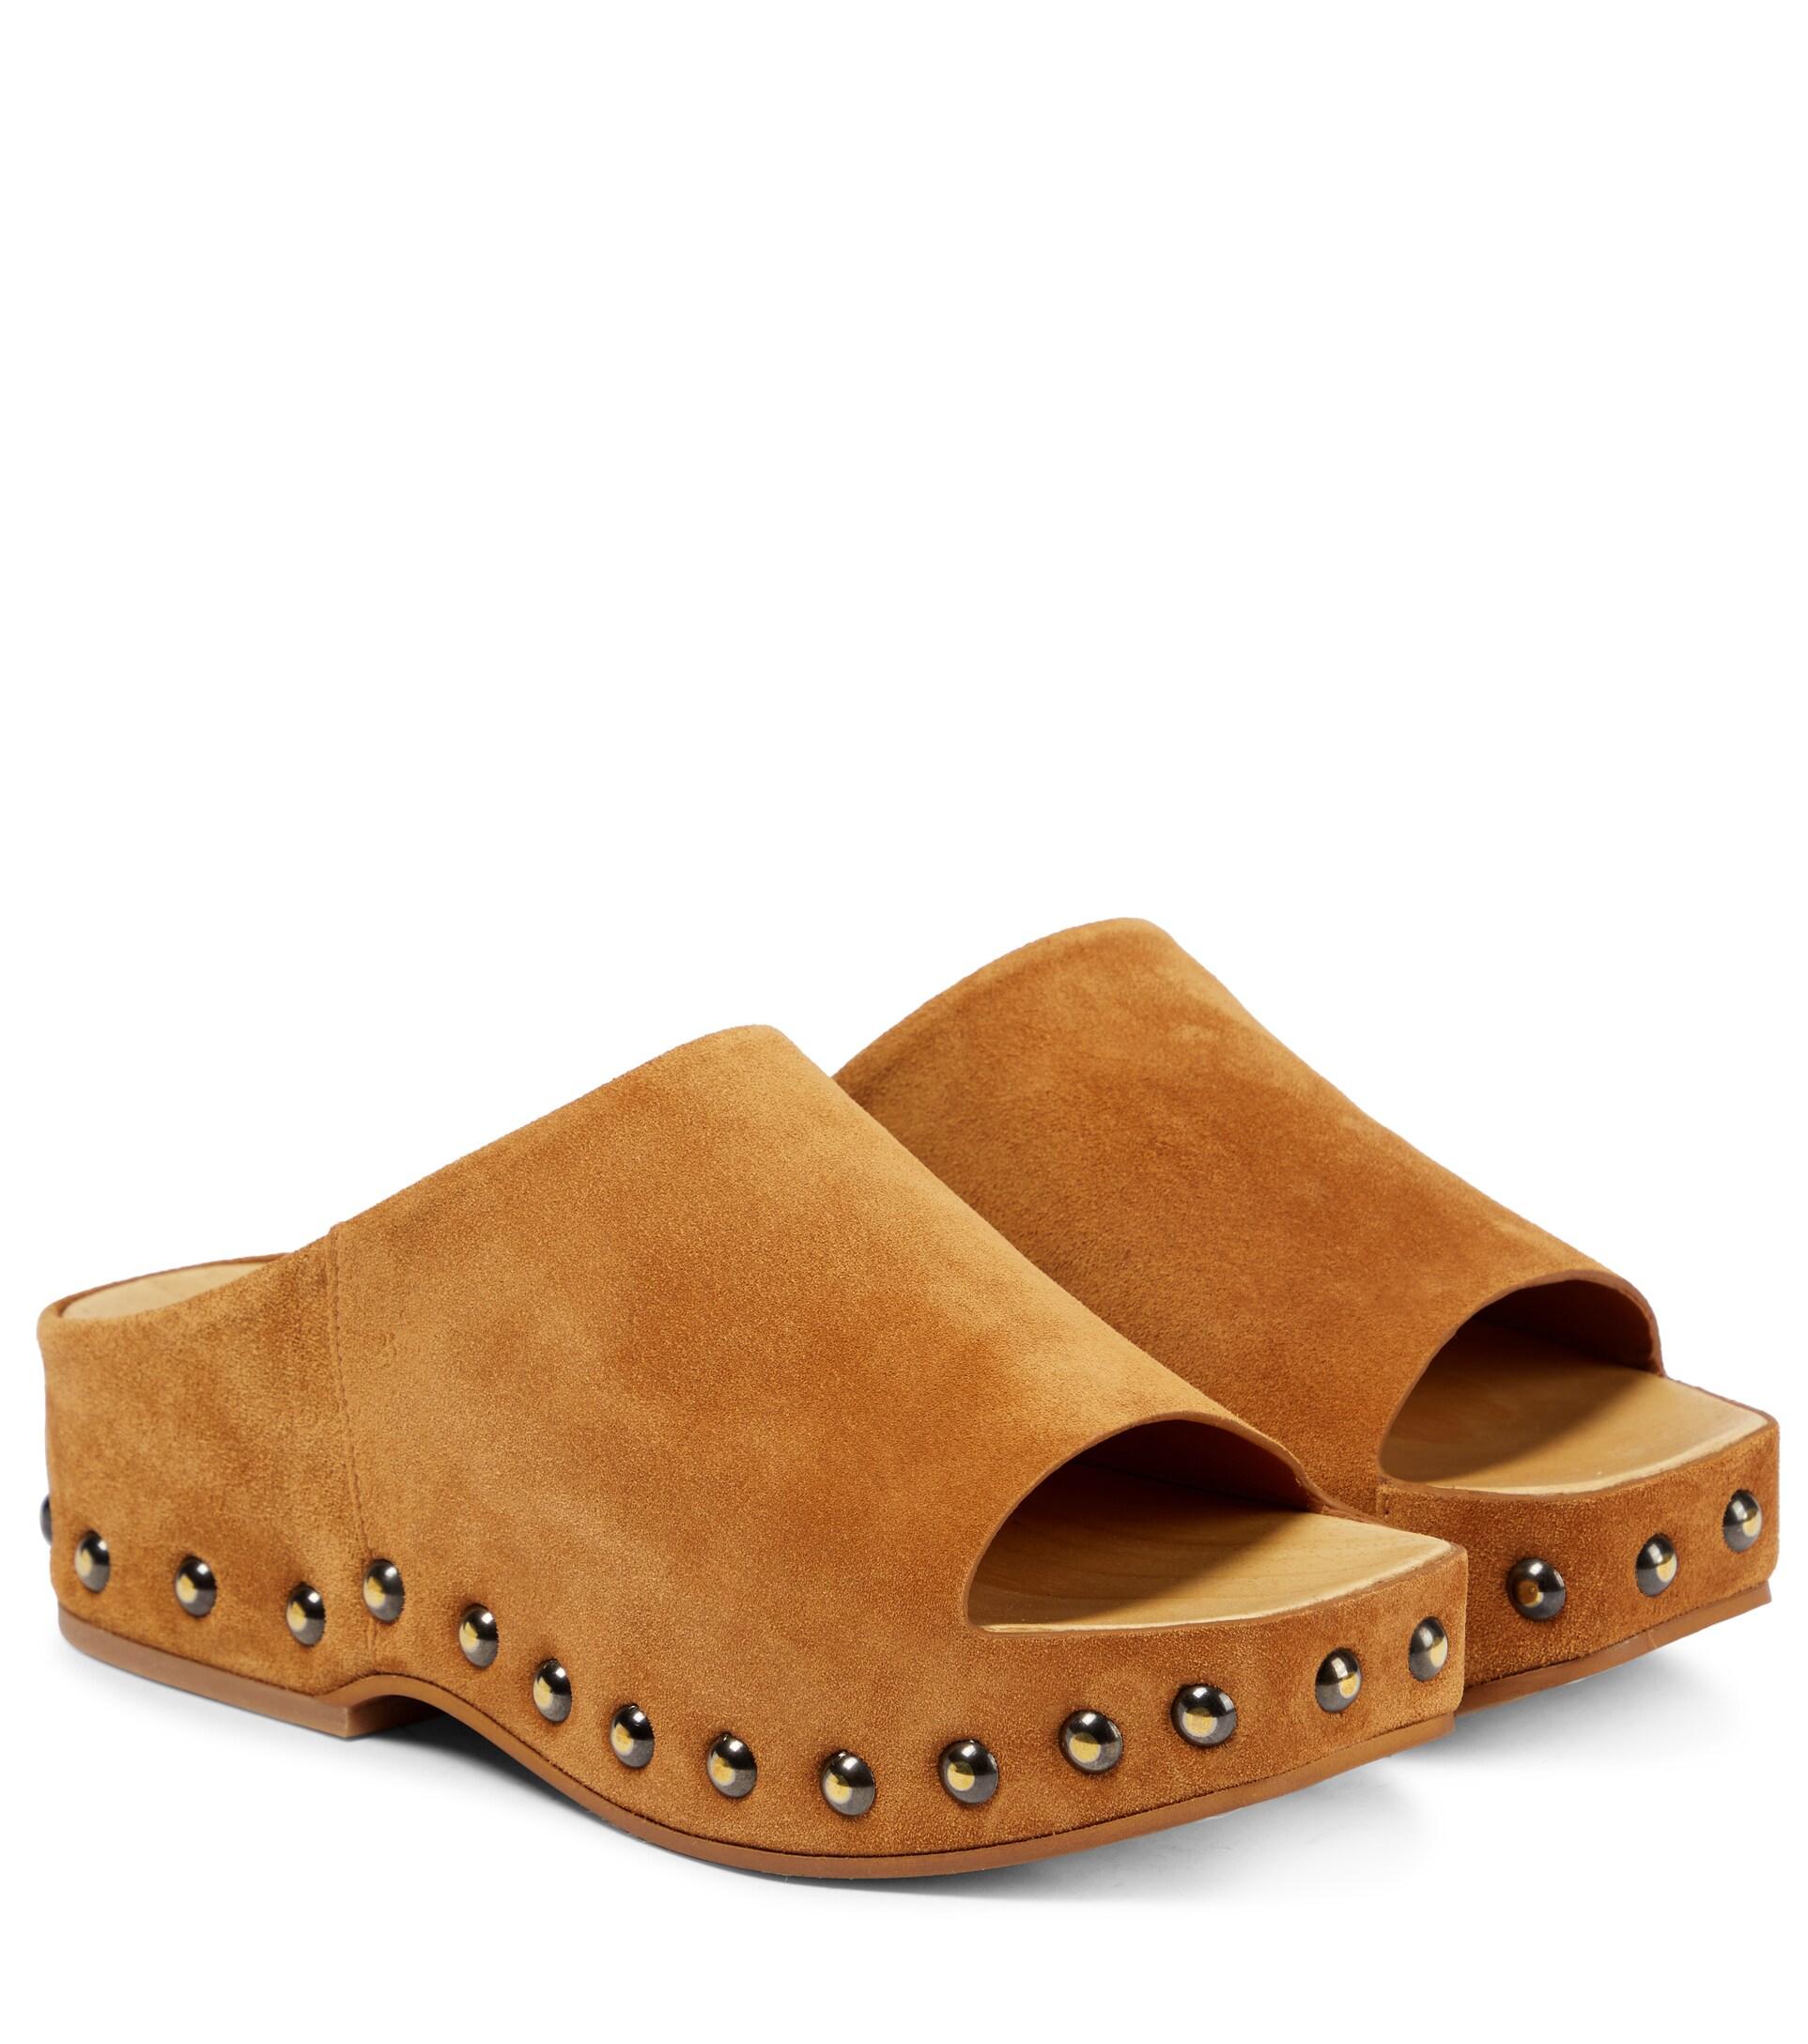 Robert Clergerie Mia Suede Clogs in Natural | Lyst